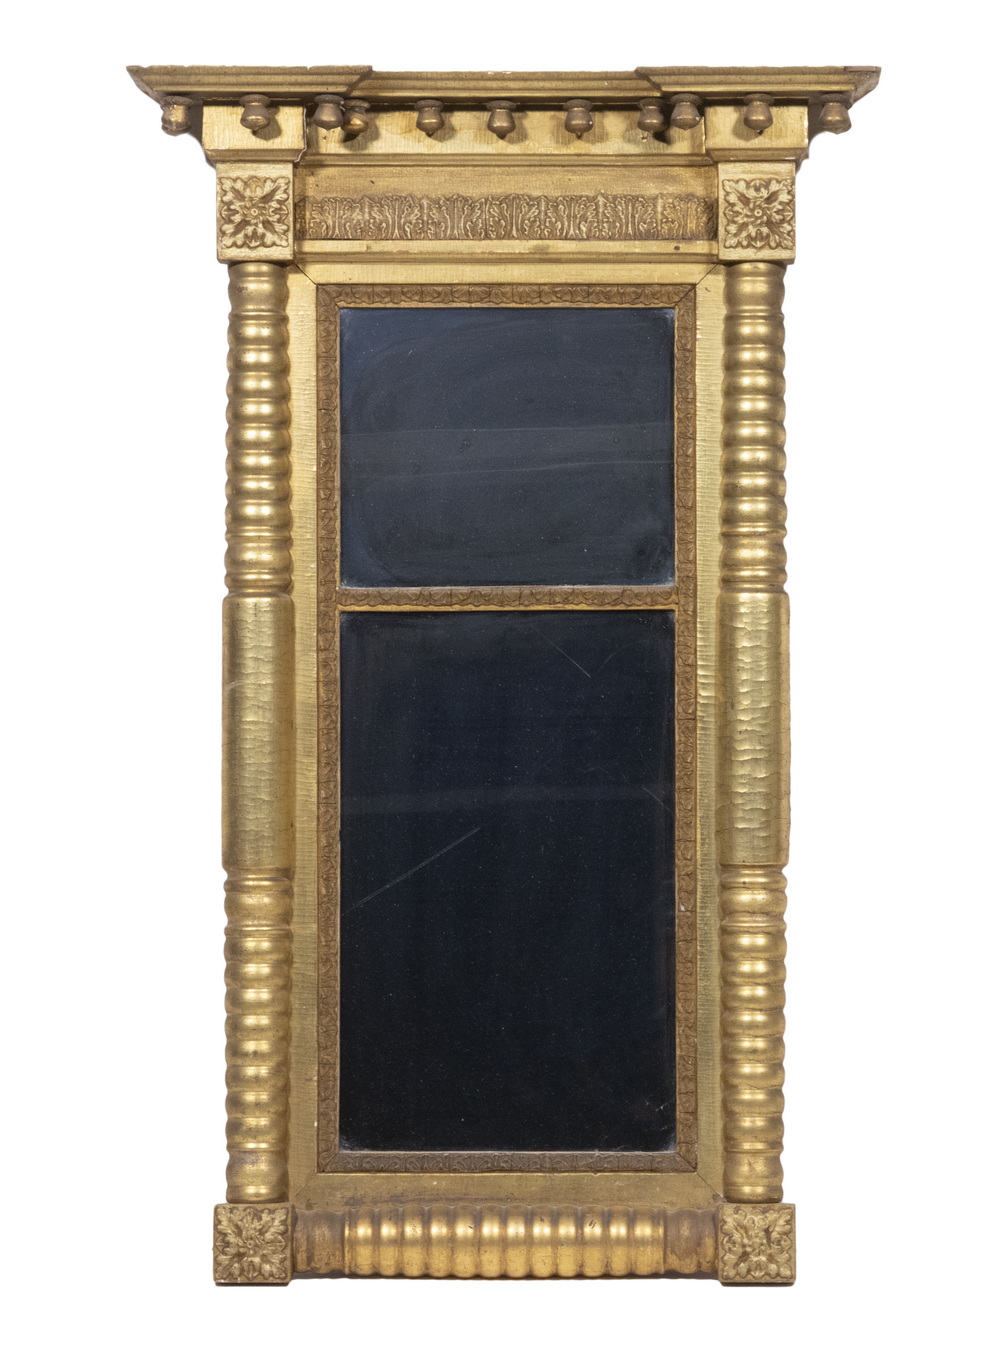 FEDERAL PERIOD GILT FRAMED TWO-PANEL